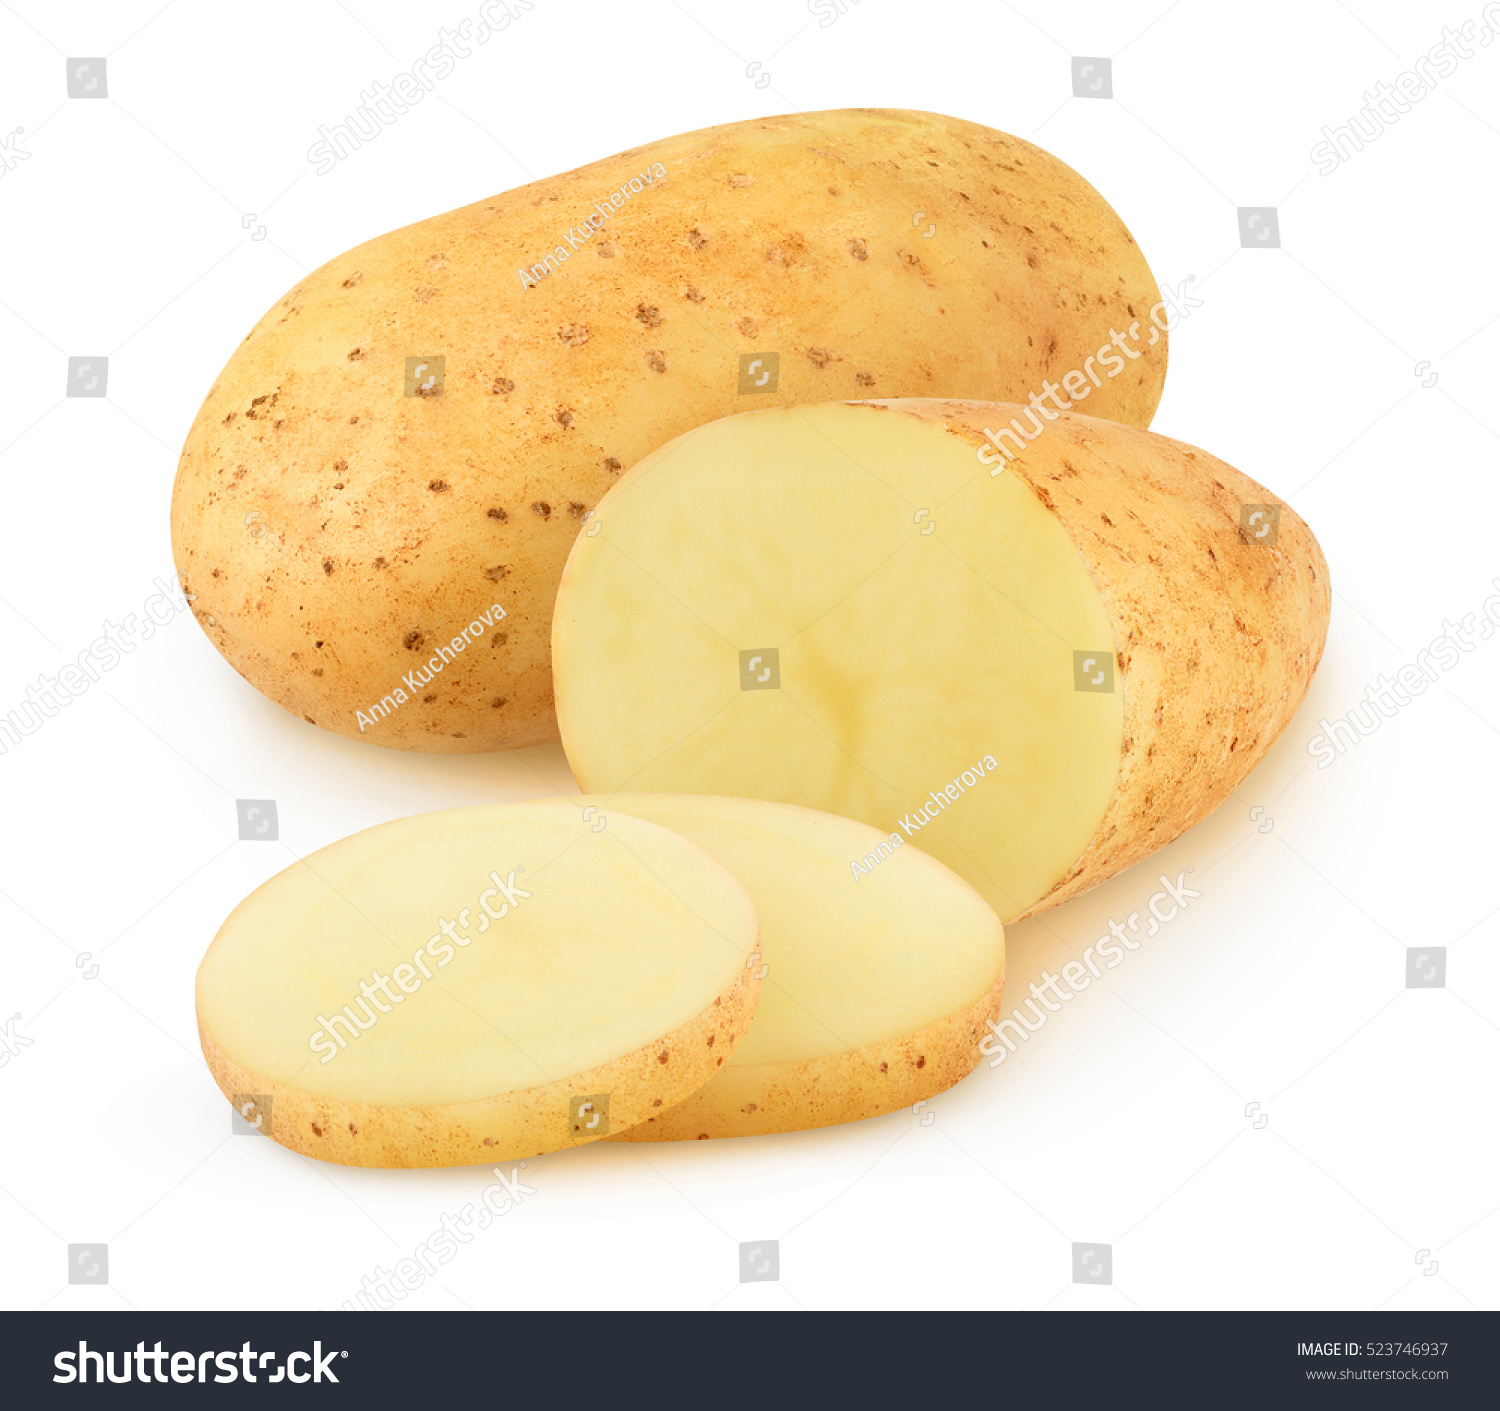 Isolated potatoes. Cut raw potato vegetables isolated on white background with clipping path #523746937